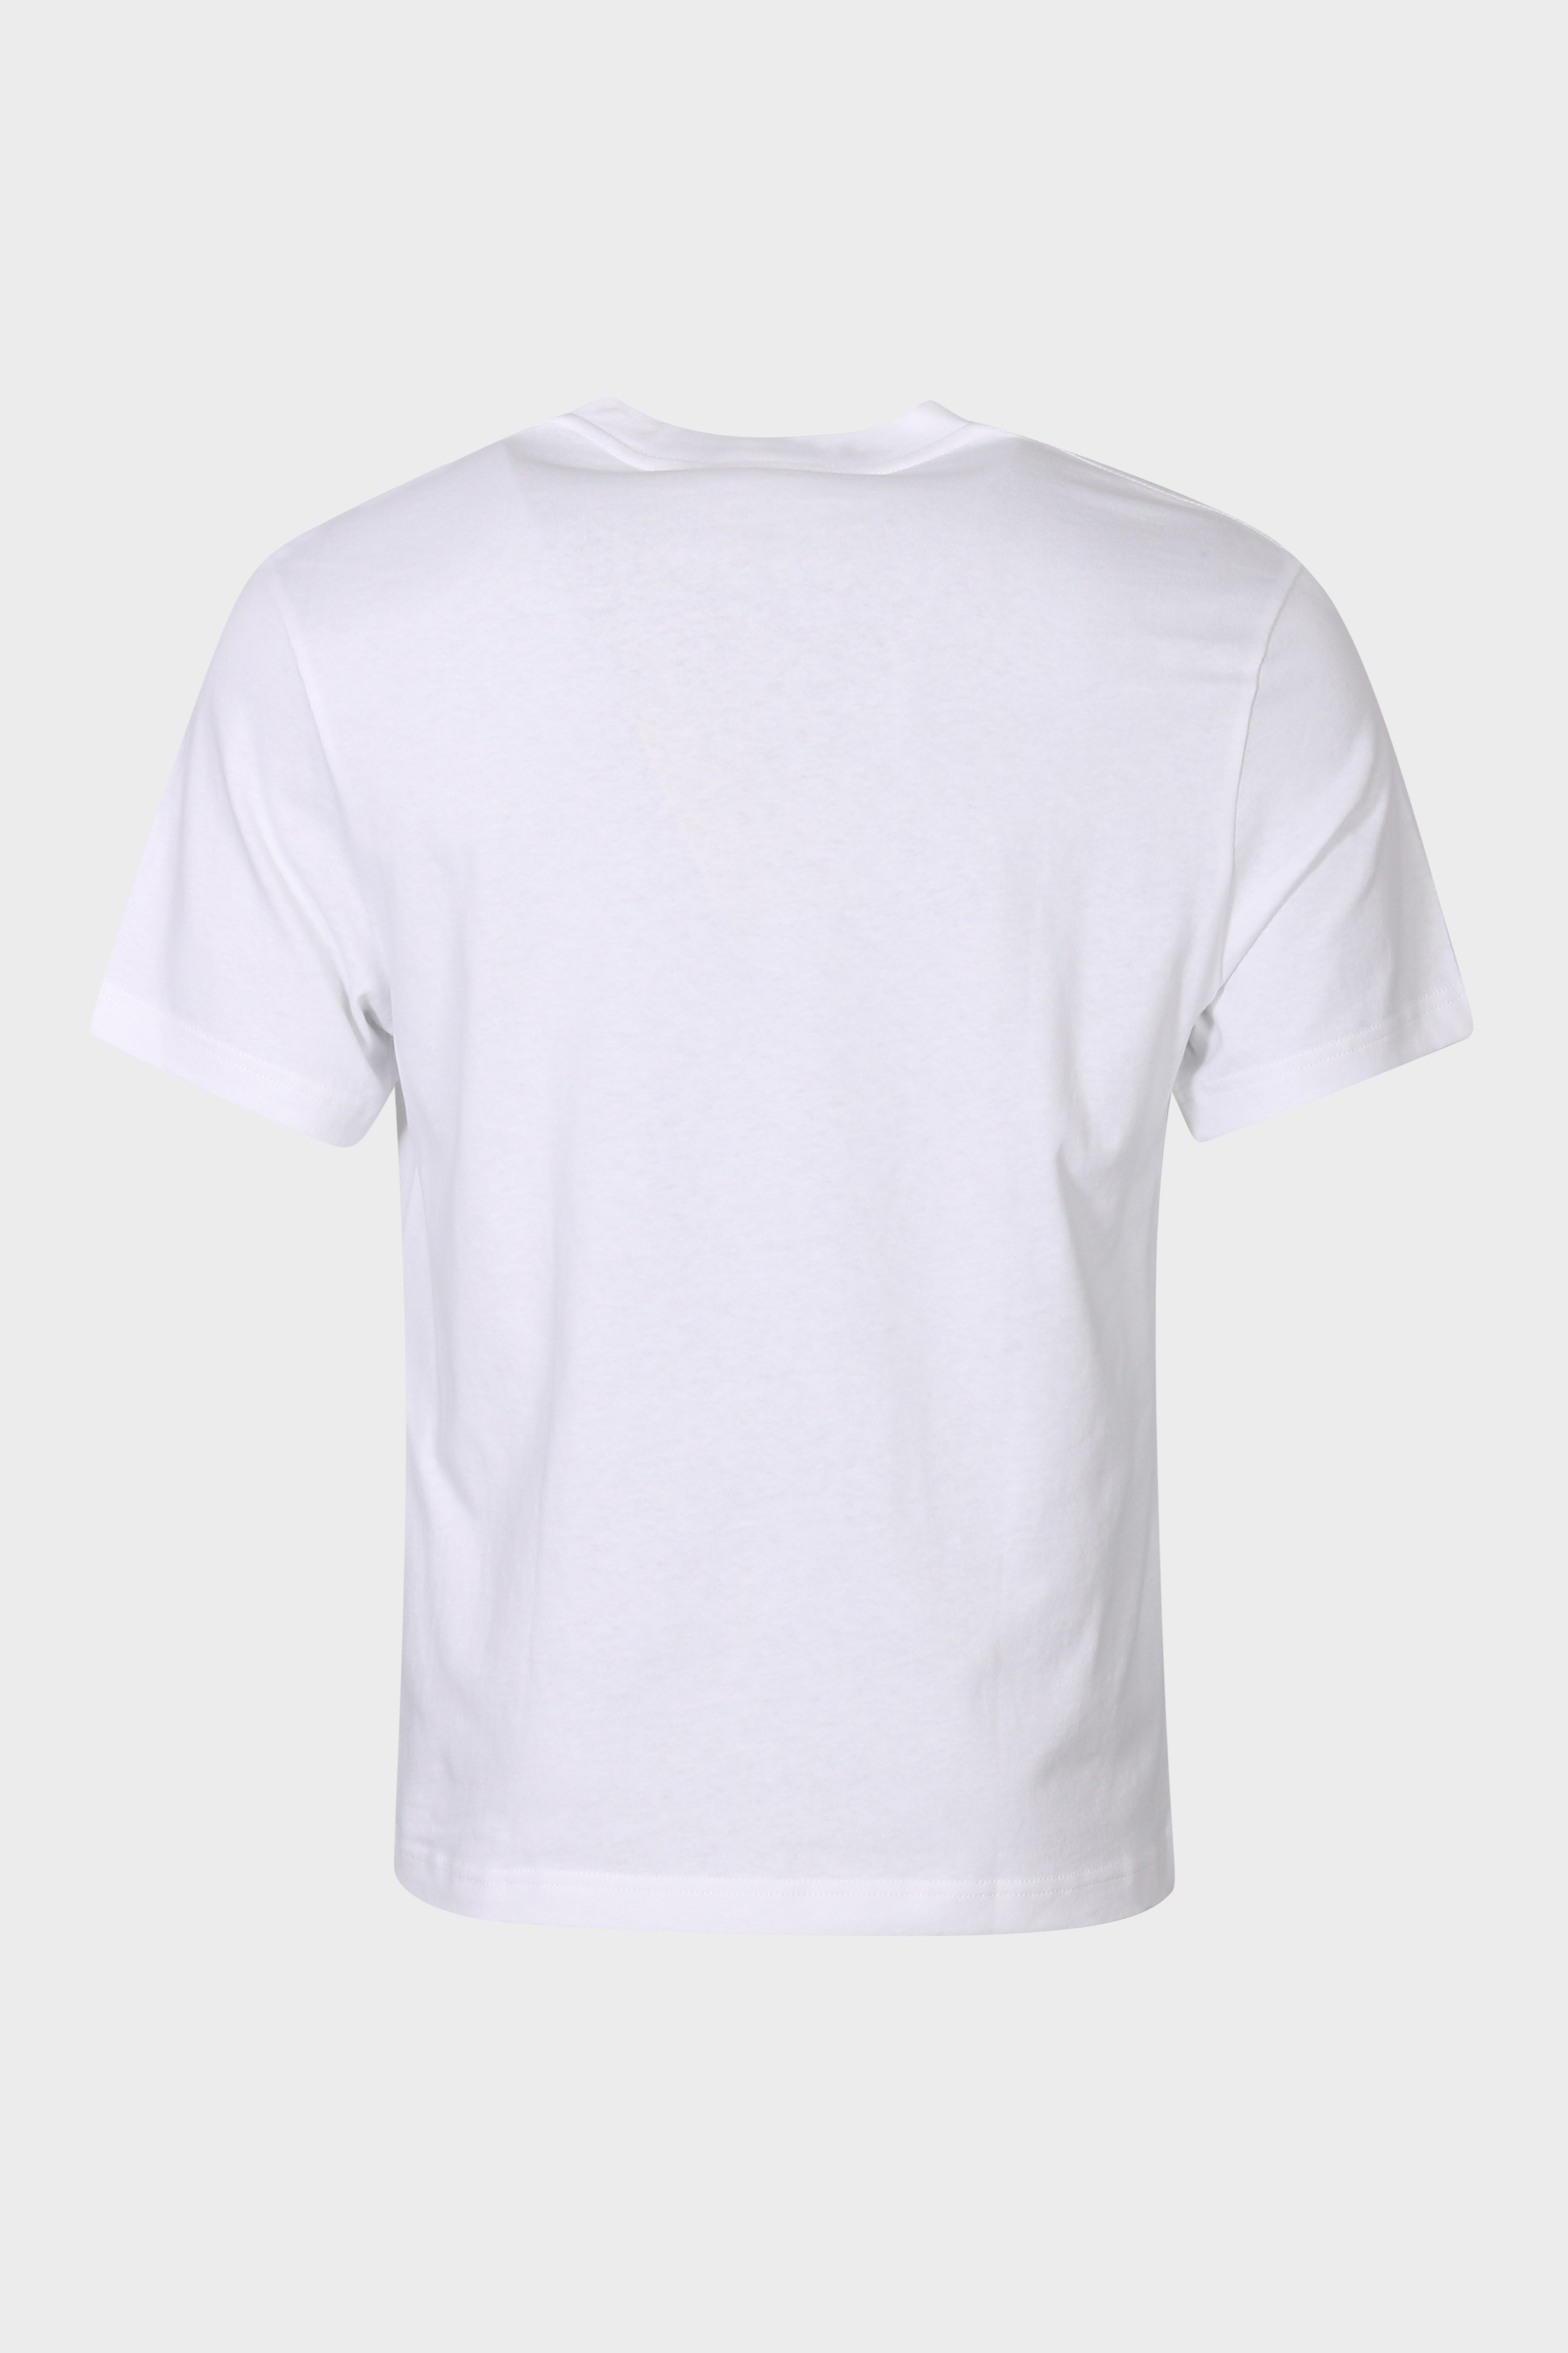 AXEL ARIGATO Legacy T-Shirt in White M